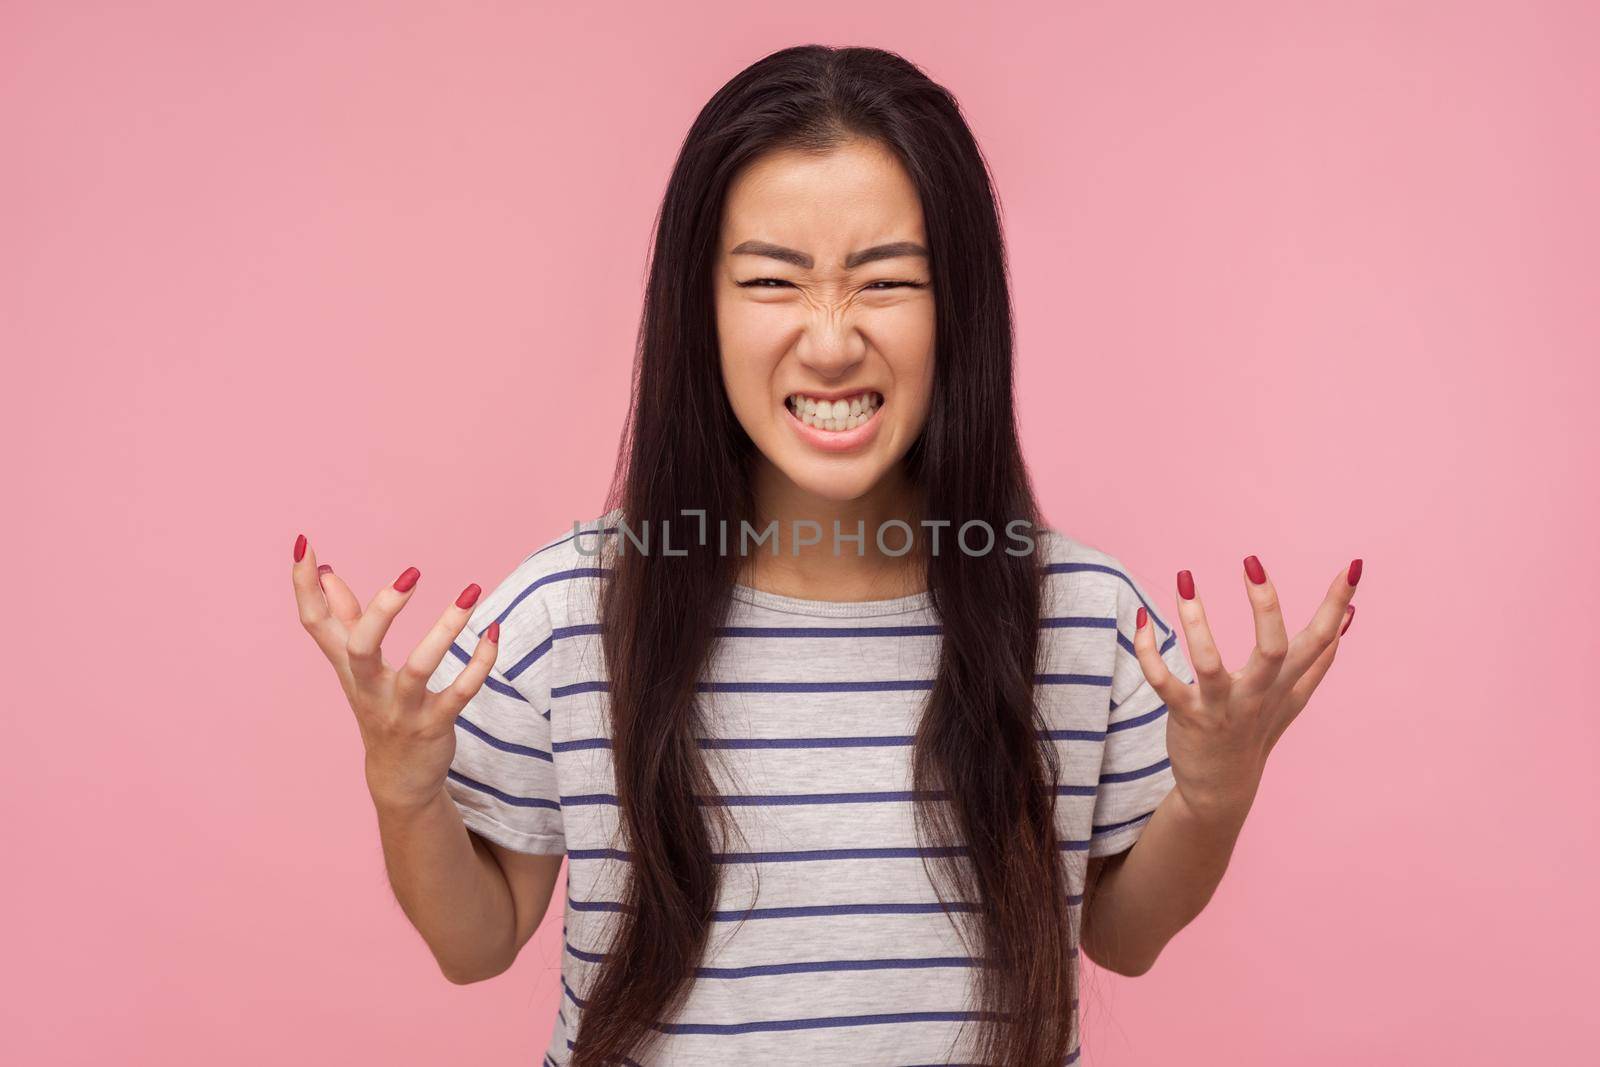 Portrait of enraged furious girl with long hair in striped t-shirt standing with clenched teeth and raised hands expressing wild anger, feeling crazy. indoor studio shot isolated on pink background